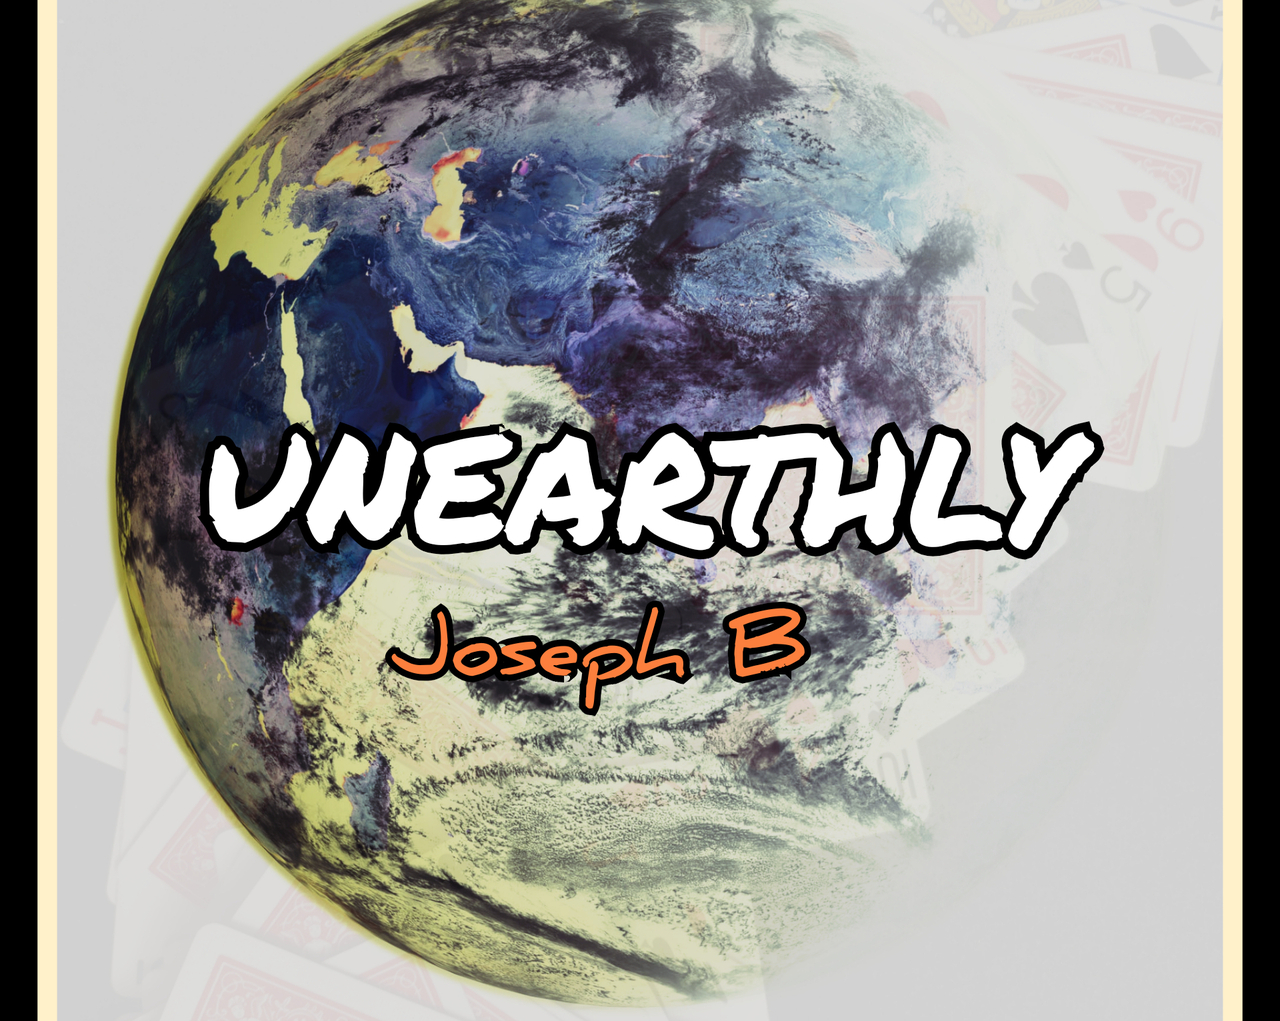 Unearthly by Joseph B. (MP4 Video Download)